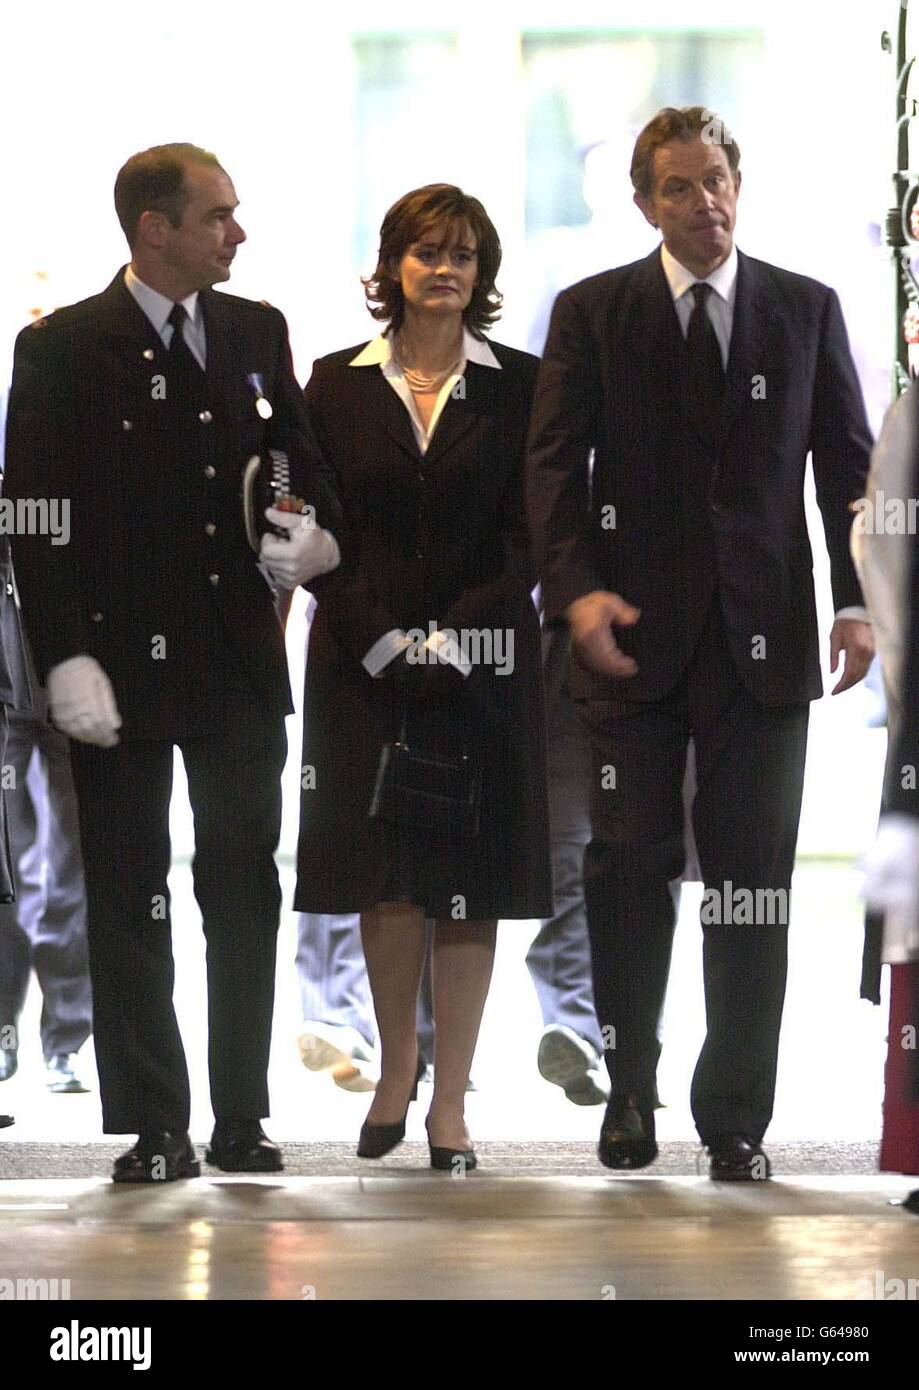 Prime Minister Tony Blair and wife Cherie arrive for the funeral of Detective Constable Stephen Oake at Manchester Cathedral. A thousand mourners attended the funeral of the Special Branch police officer. *... stabbed to death in an anti-terrorism raid in Manchester. Stock Photo